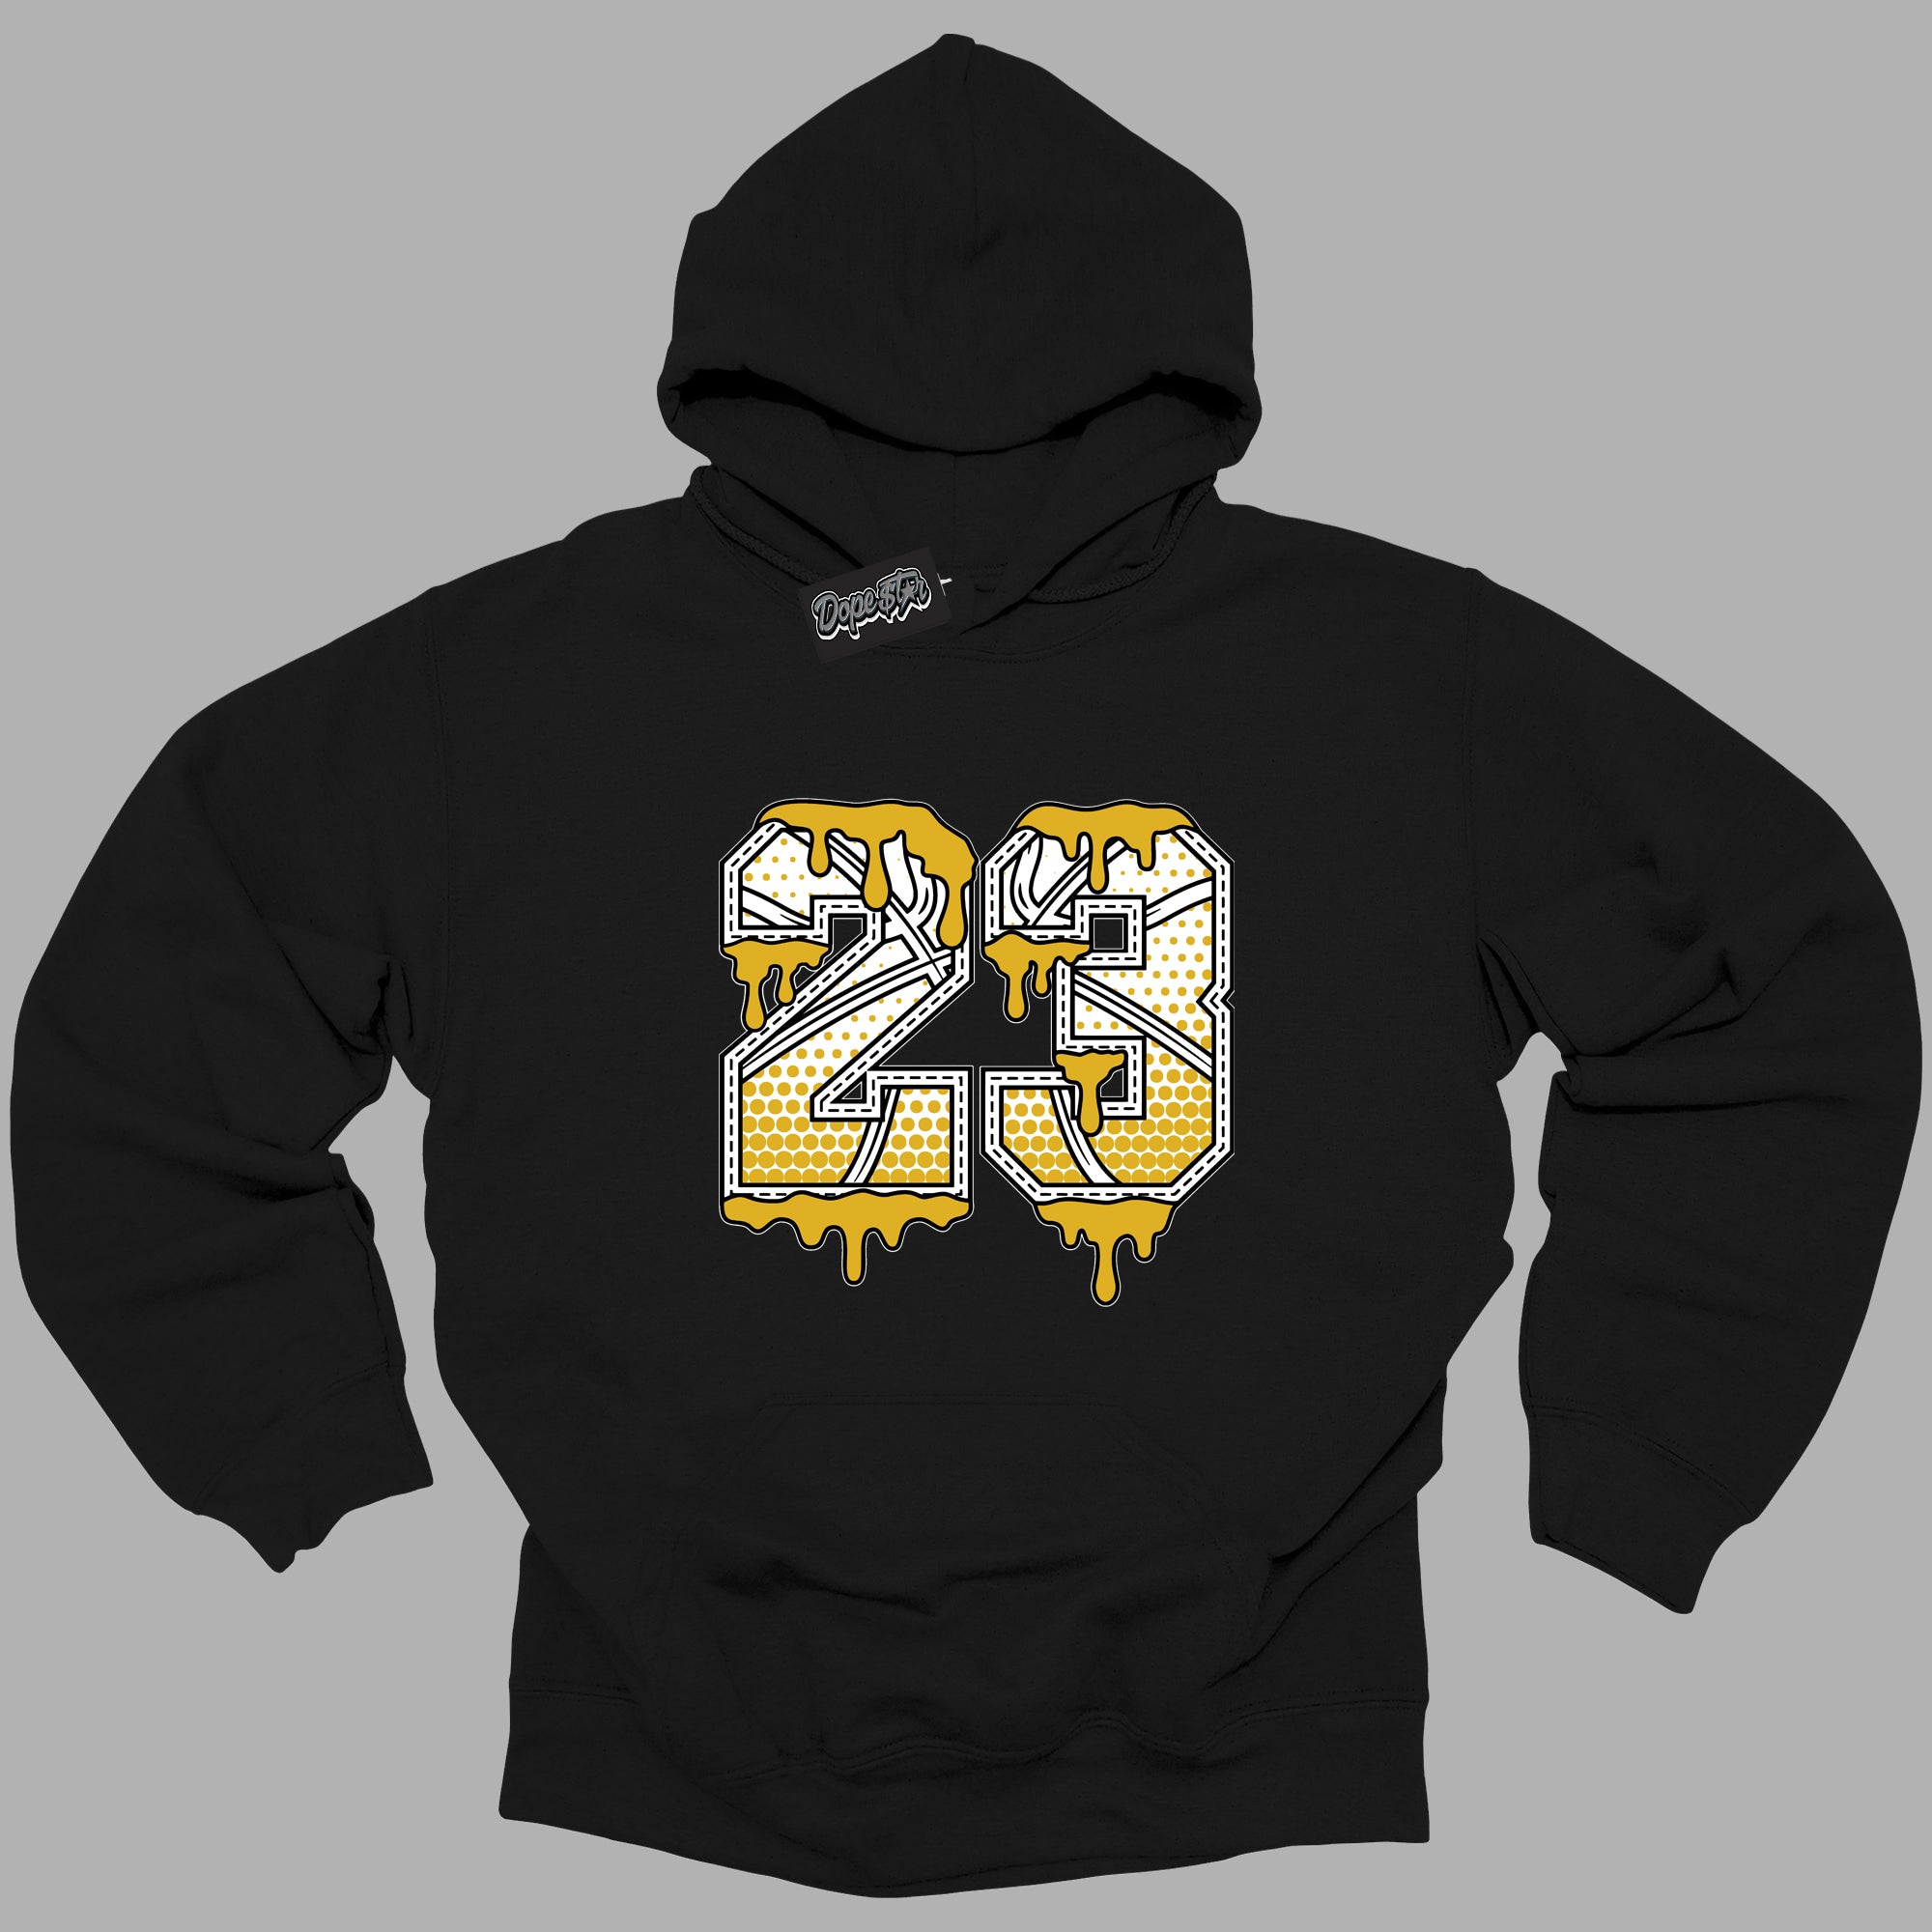 Cool Black Hoodie with “ 23 Ball ”  design that Perfectly Matches Yellow Ochre 6s Sneakers.